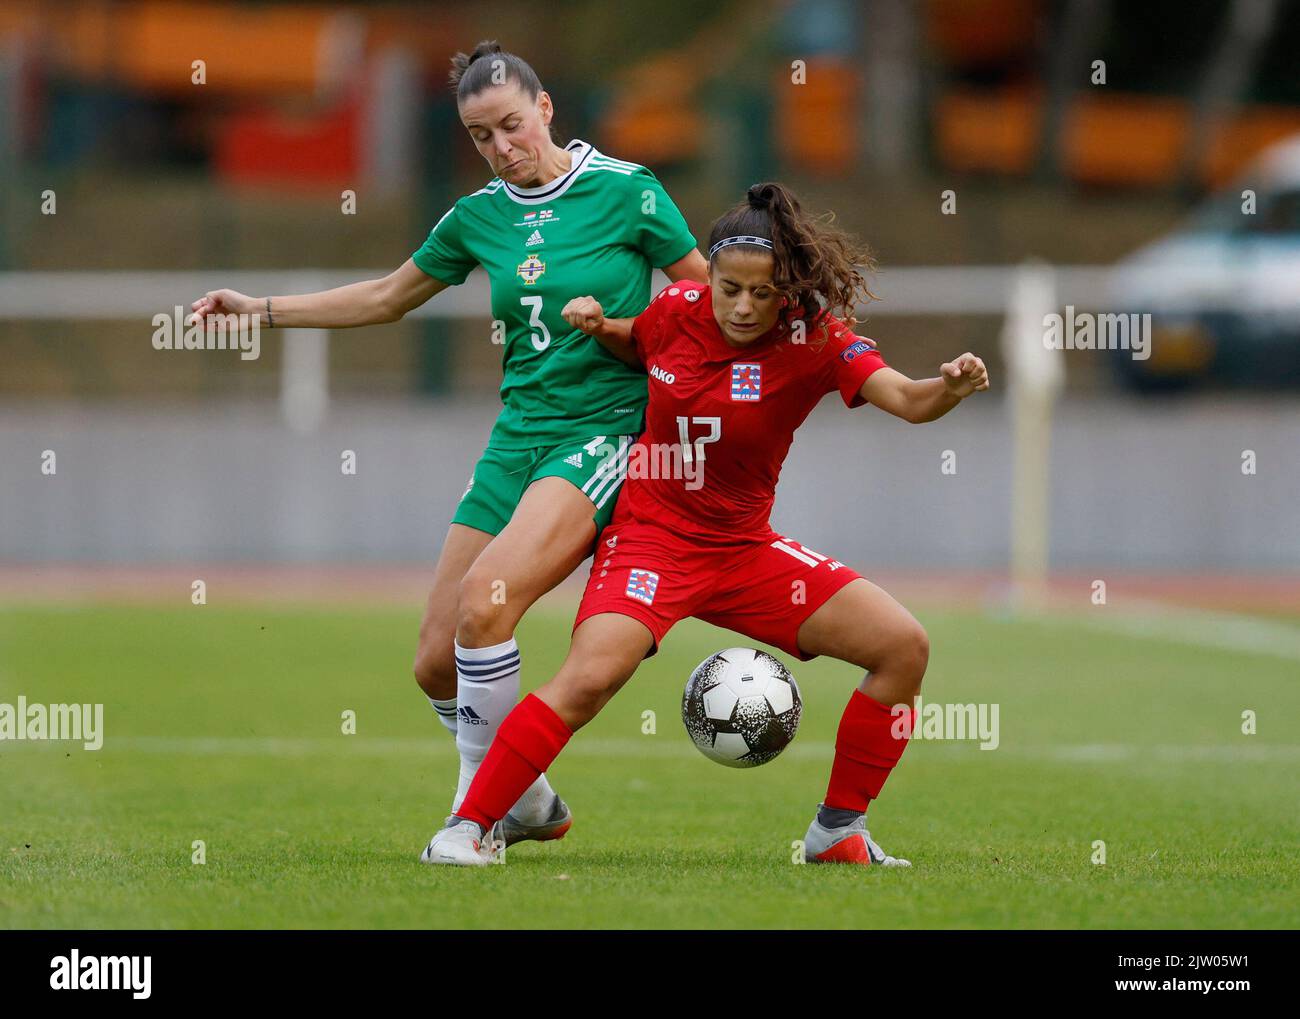 Soccer Football - FIFA Women's World Cup Australia and New Zealand - UEFA Qualifiers - Group D - Luxembourg v Northern Ireland - Stade Emile Mayrisch, Esch-sur-Alzette, Luxembourg - September 2, 2022 Luxembourg's Caroline Magalhaes in action with Northern Ireland's Demi Vance REUTERS/Gonzalo Fuentes Stock Photo